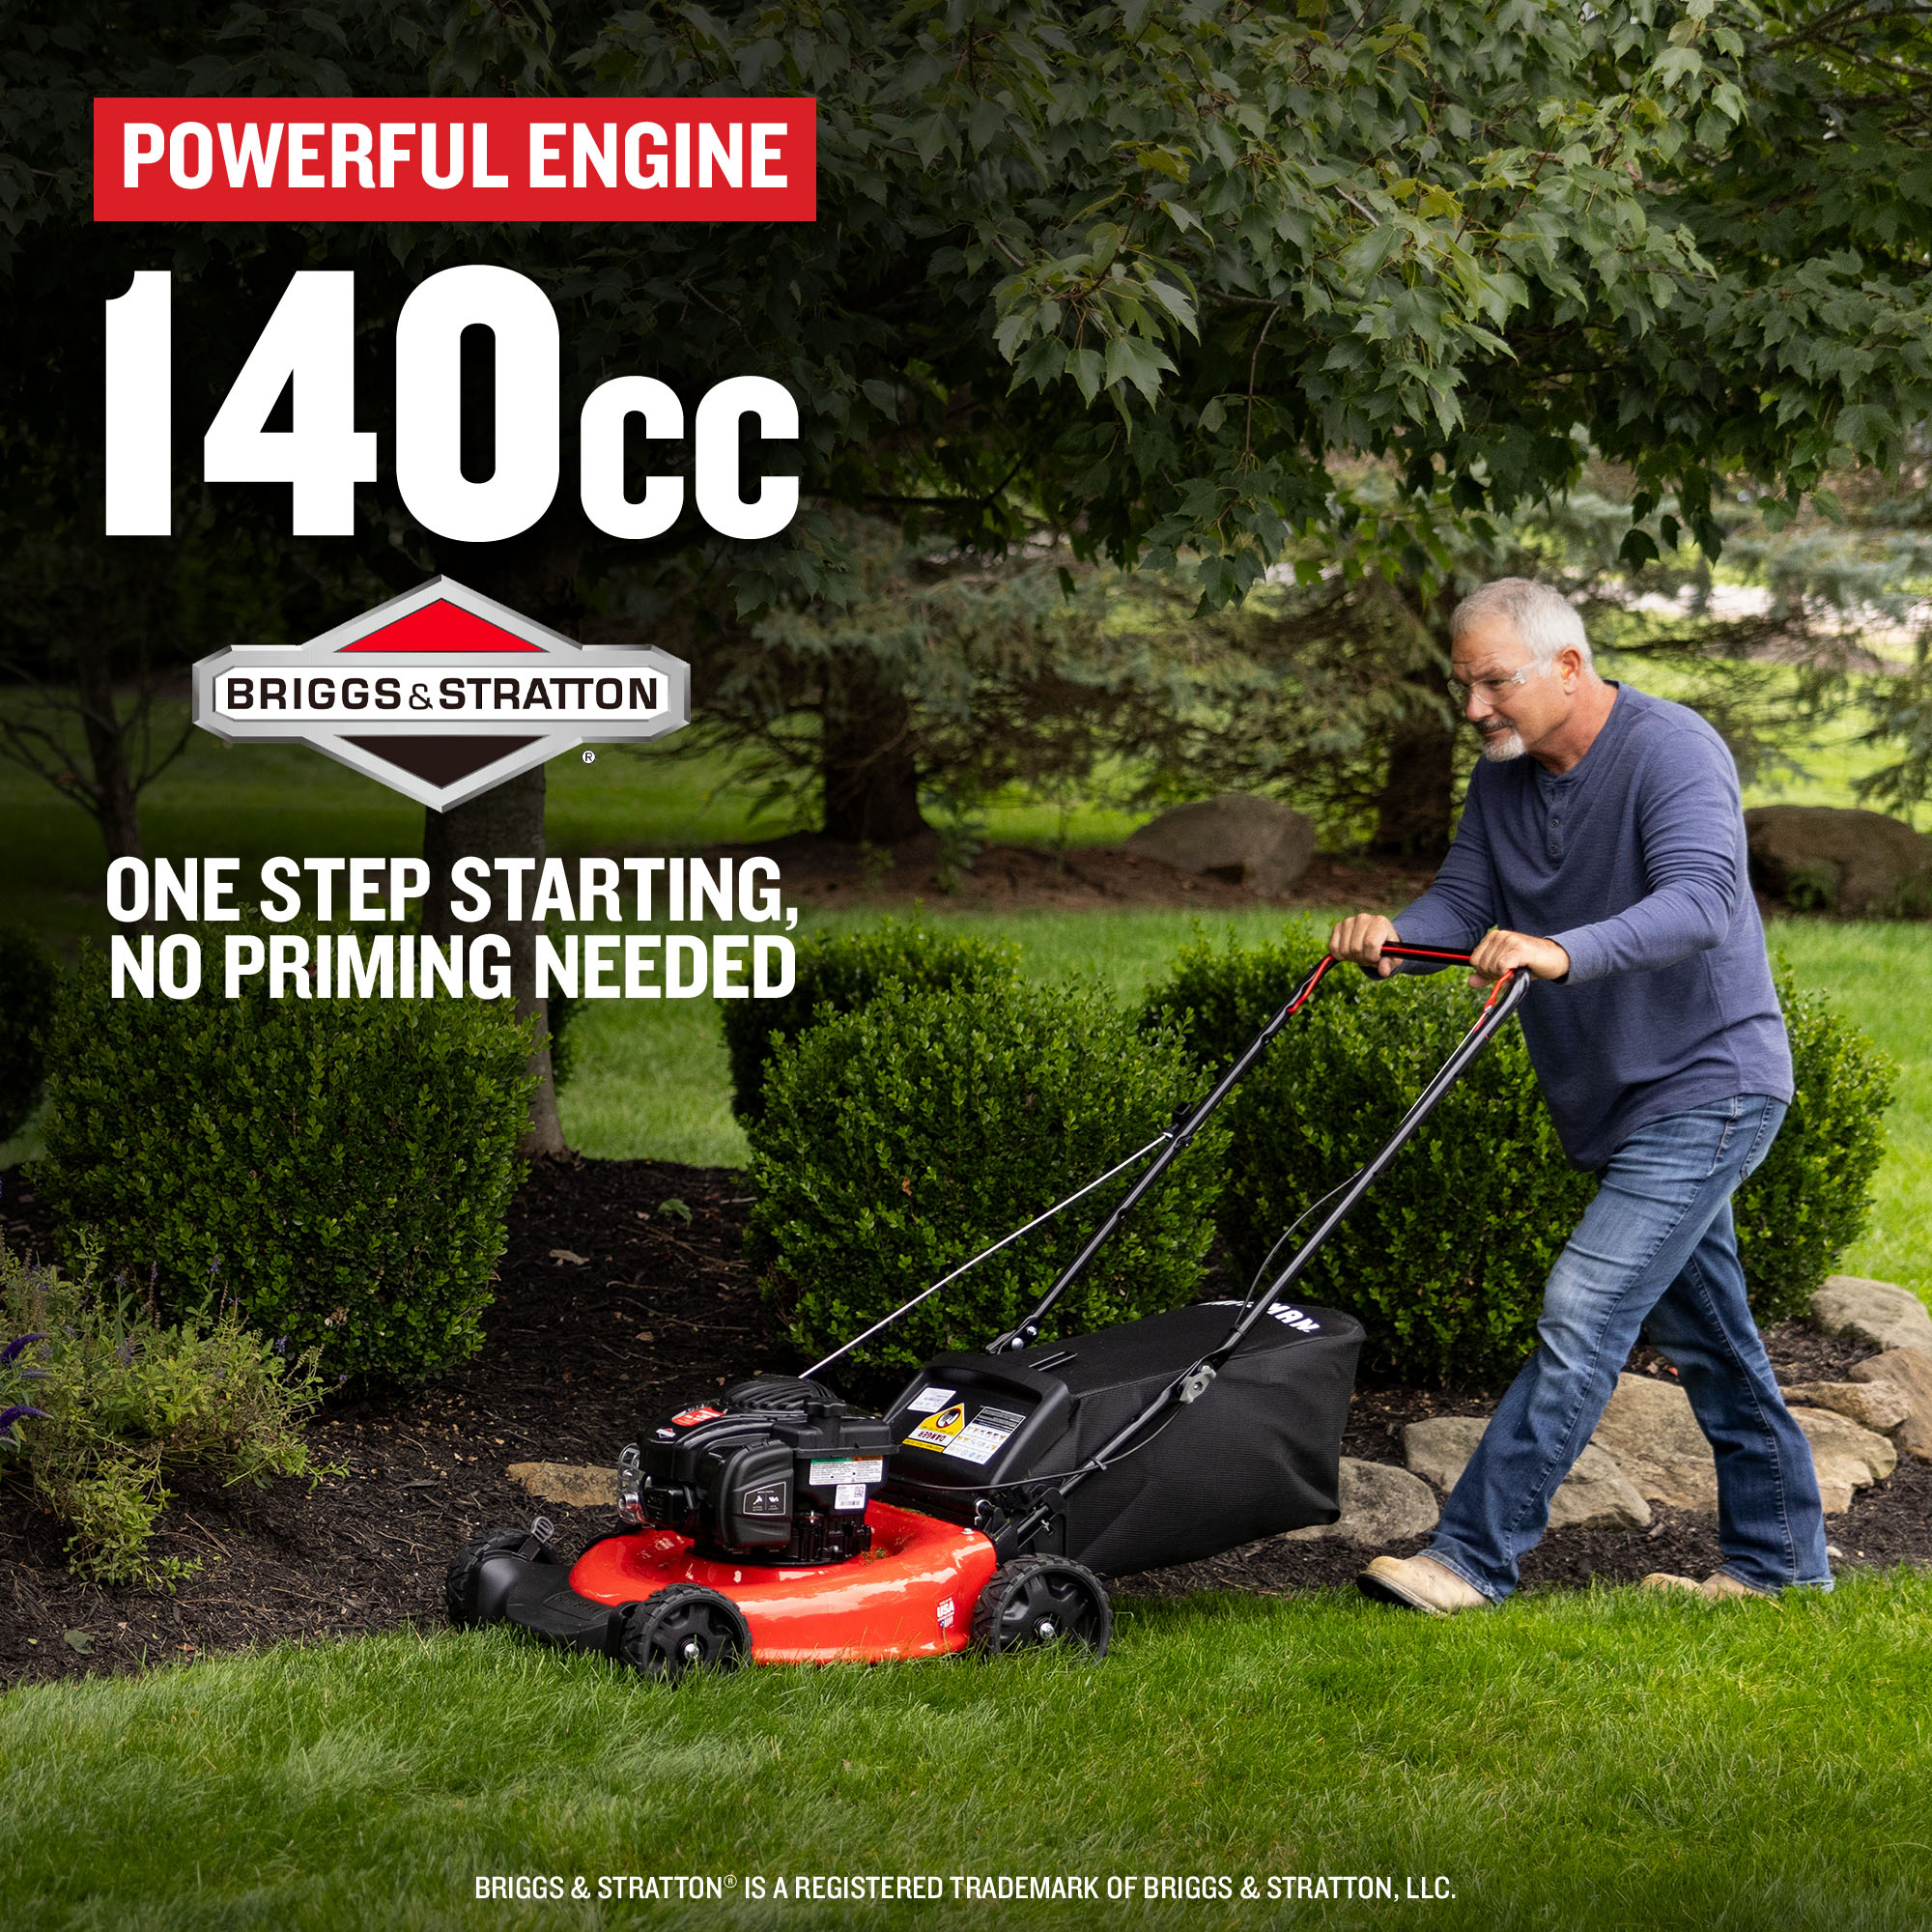 CRAFTSMAN M110 21-in Gas Push Lawn Mower with 140-cc Briggs and